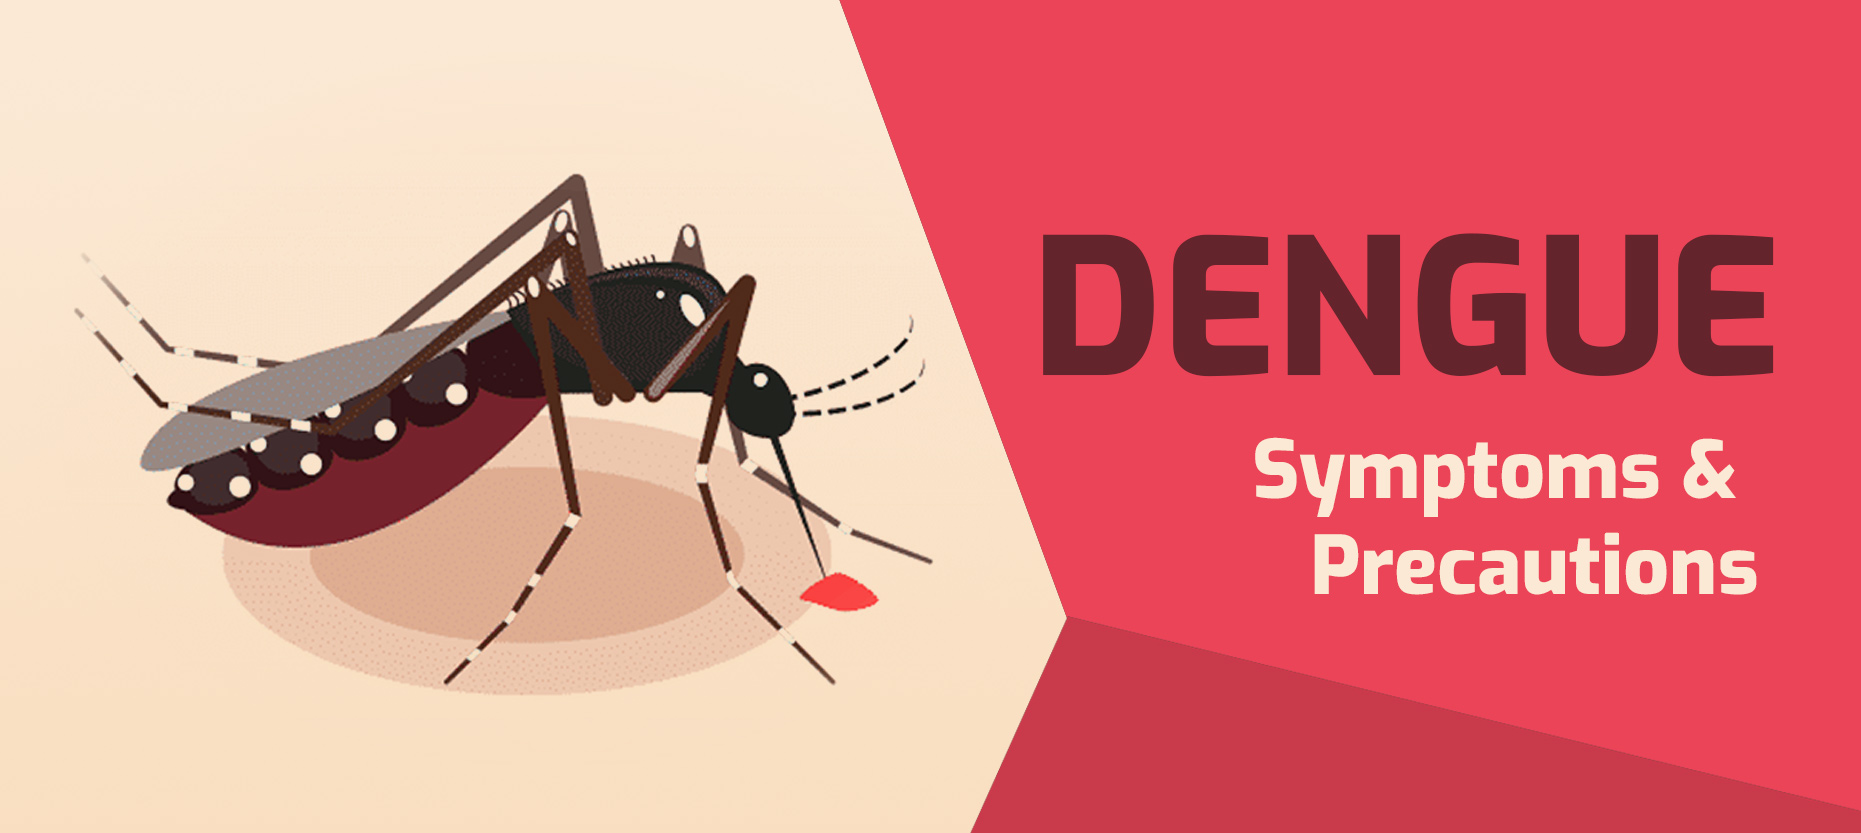 Dengue – A Viral Illness Transmitted by Mosquito Bite